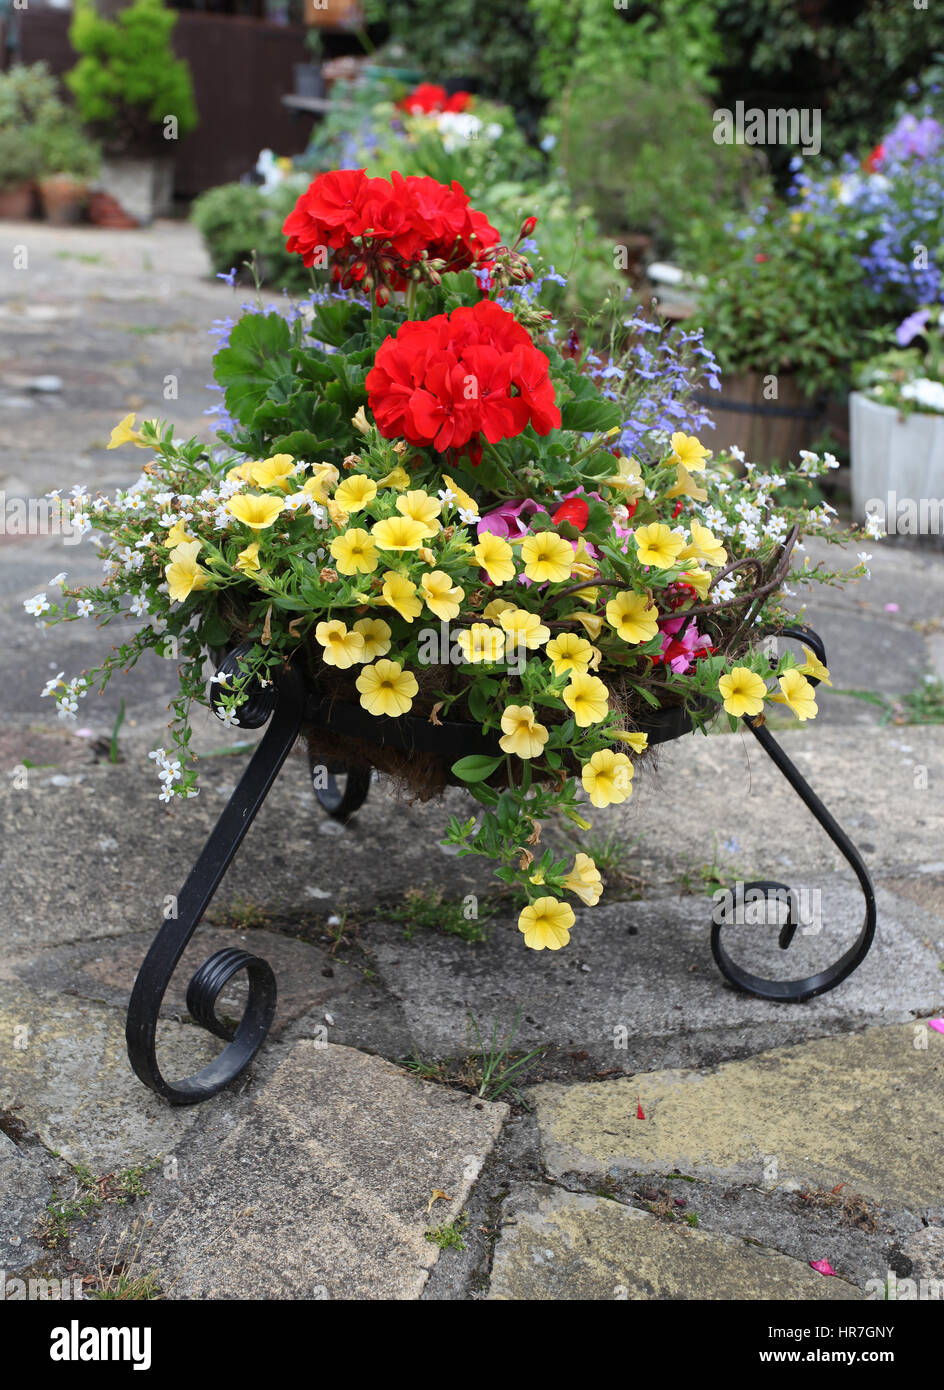 Summer Bedding Plants in a wrought iron basket Stock Photo